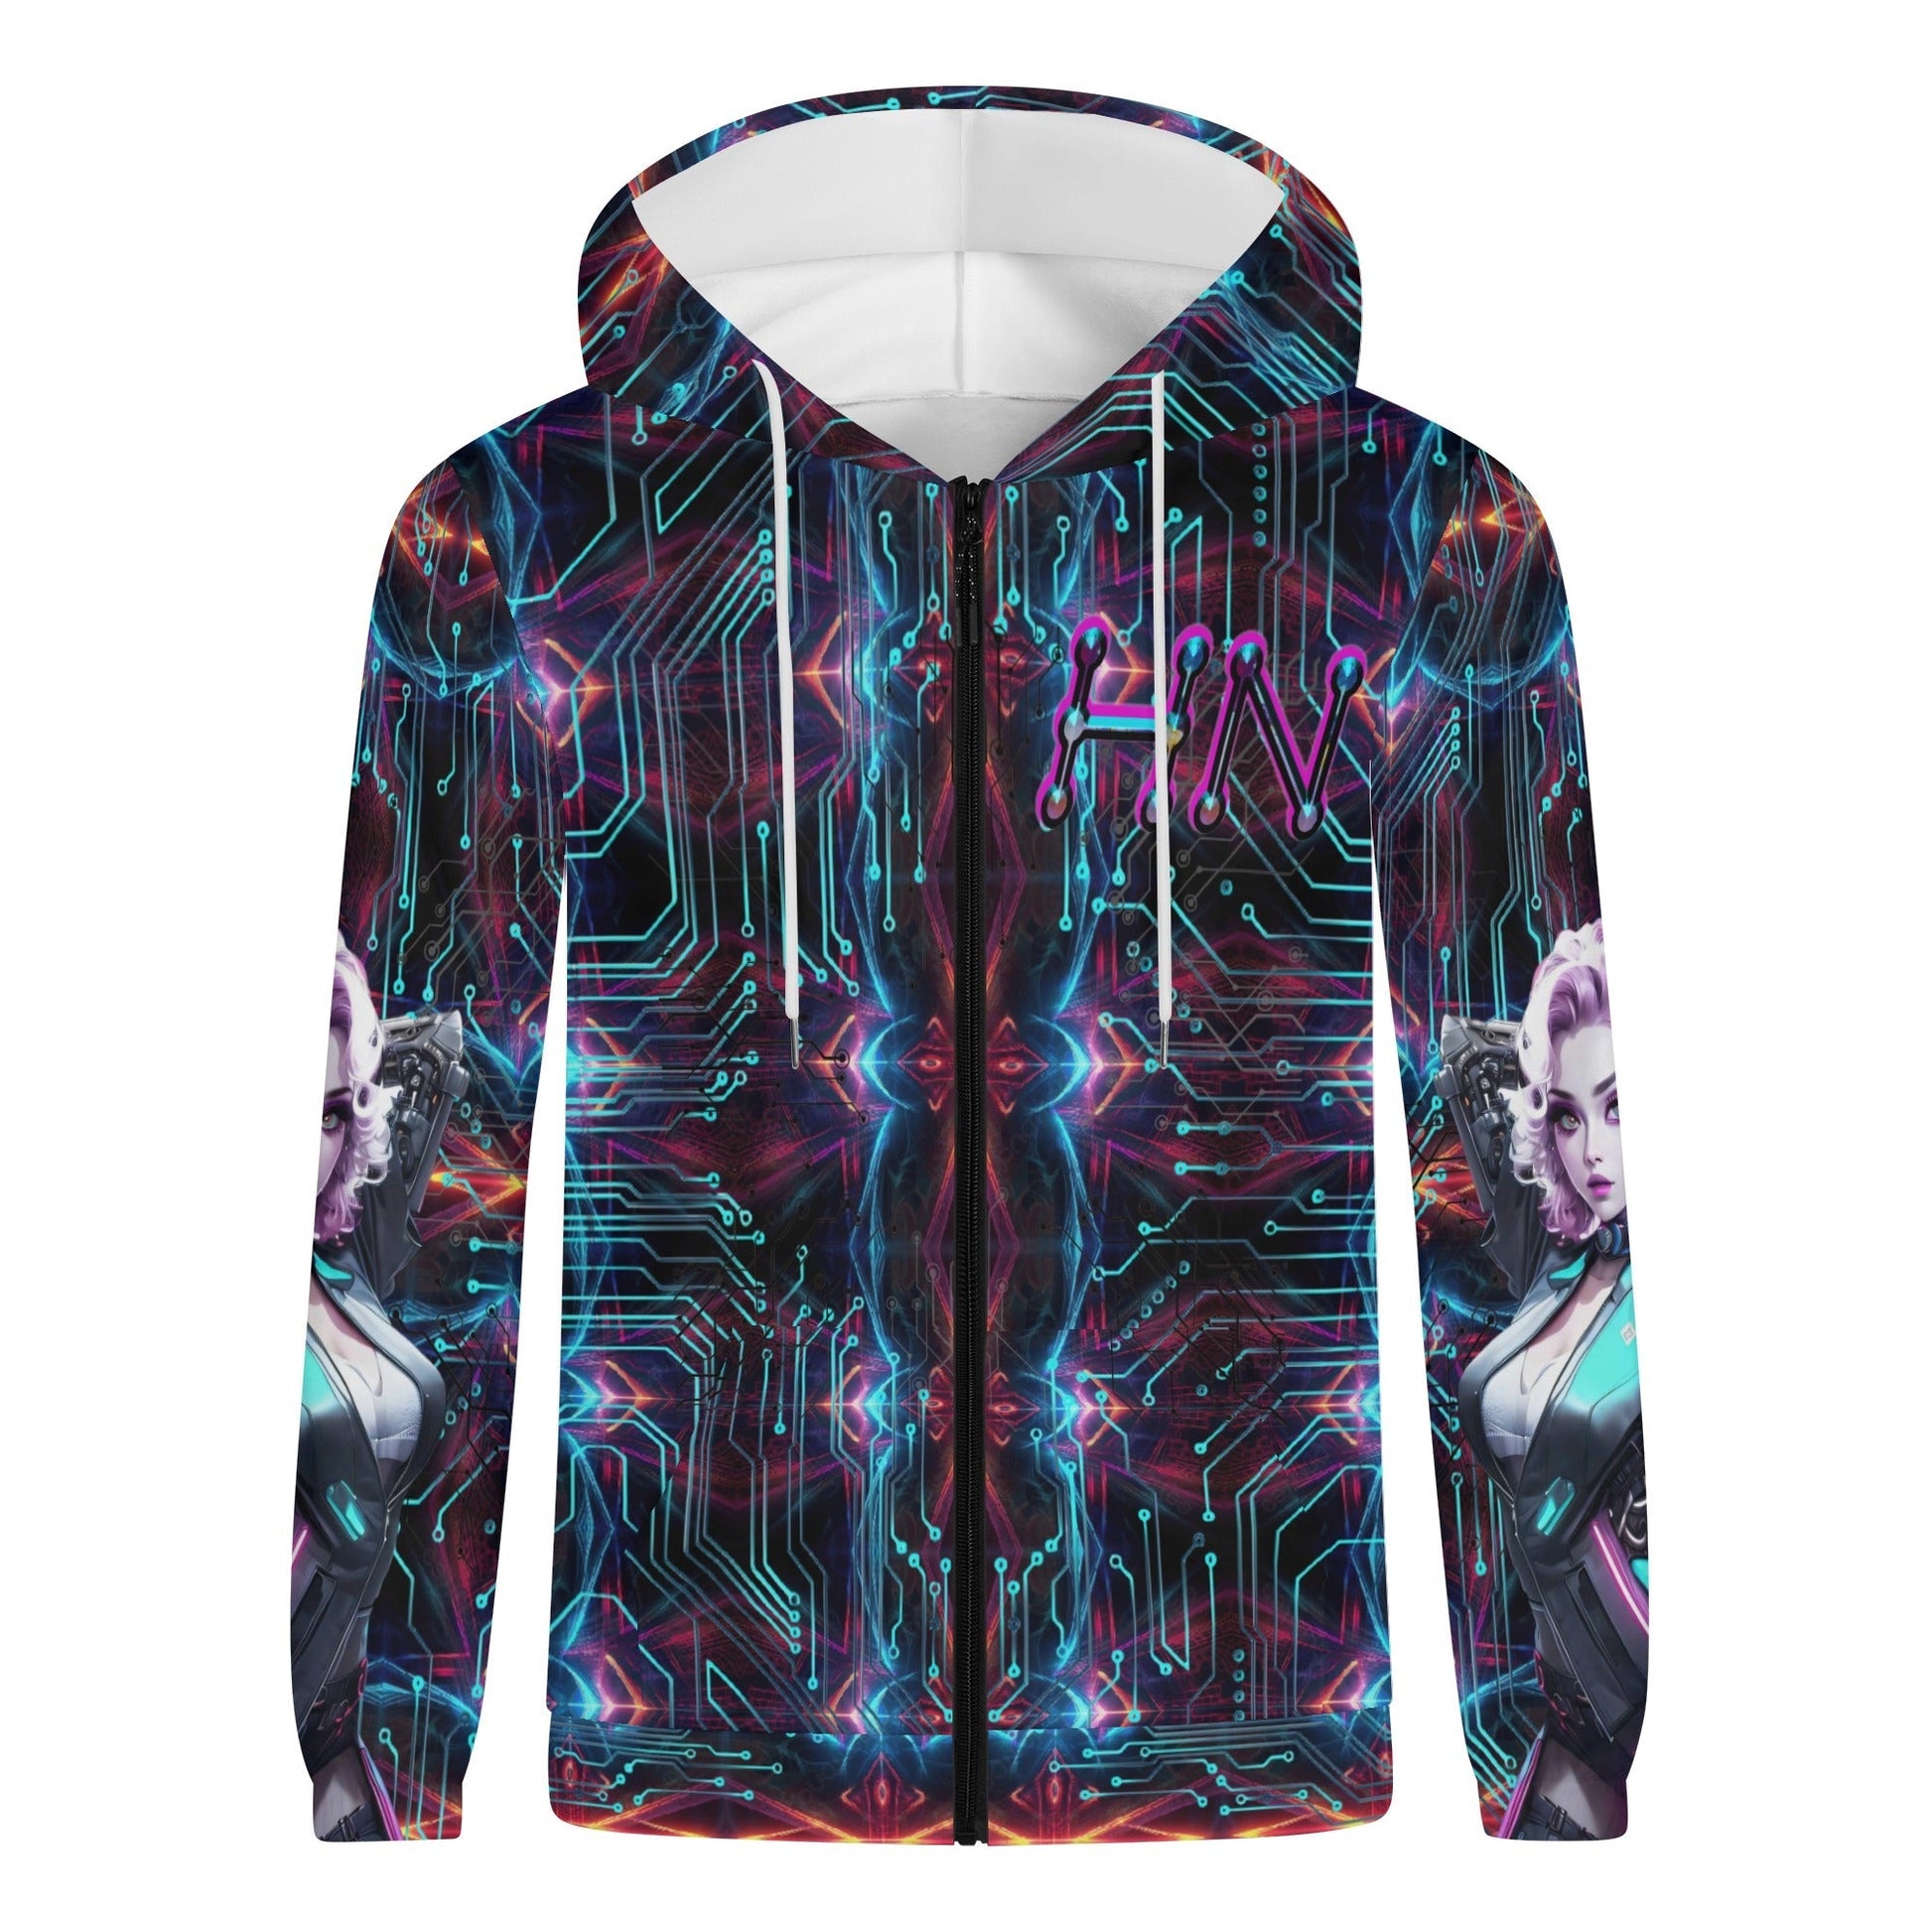 Stand out  with the  Cyber Freak Mens Lightweight Zipper Hoodie  available at Hey Nugget. Grab yours today!